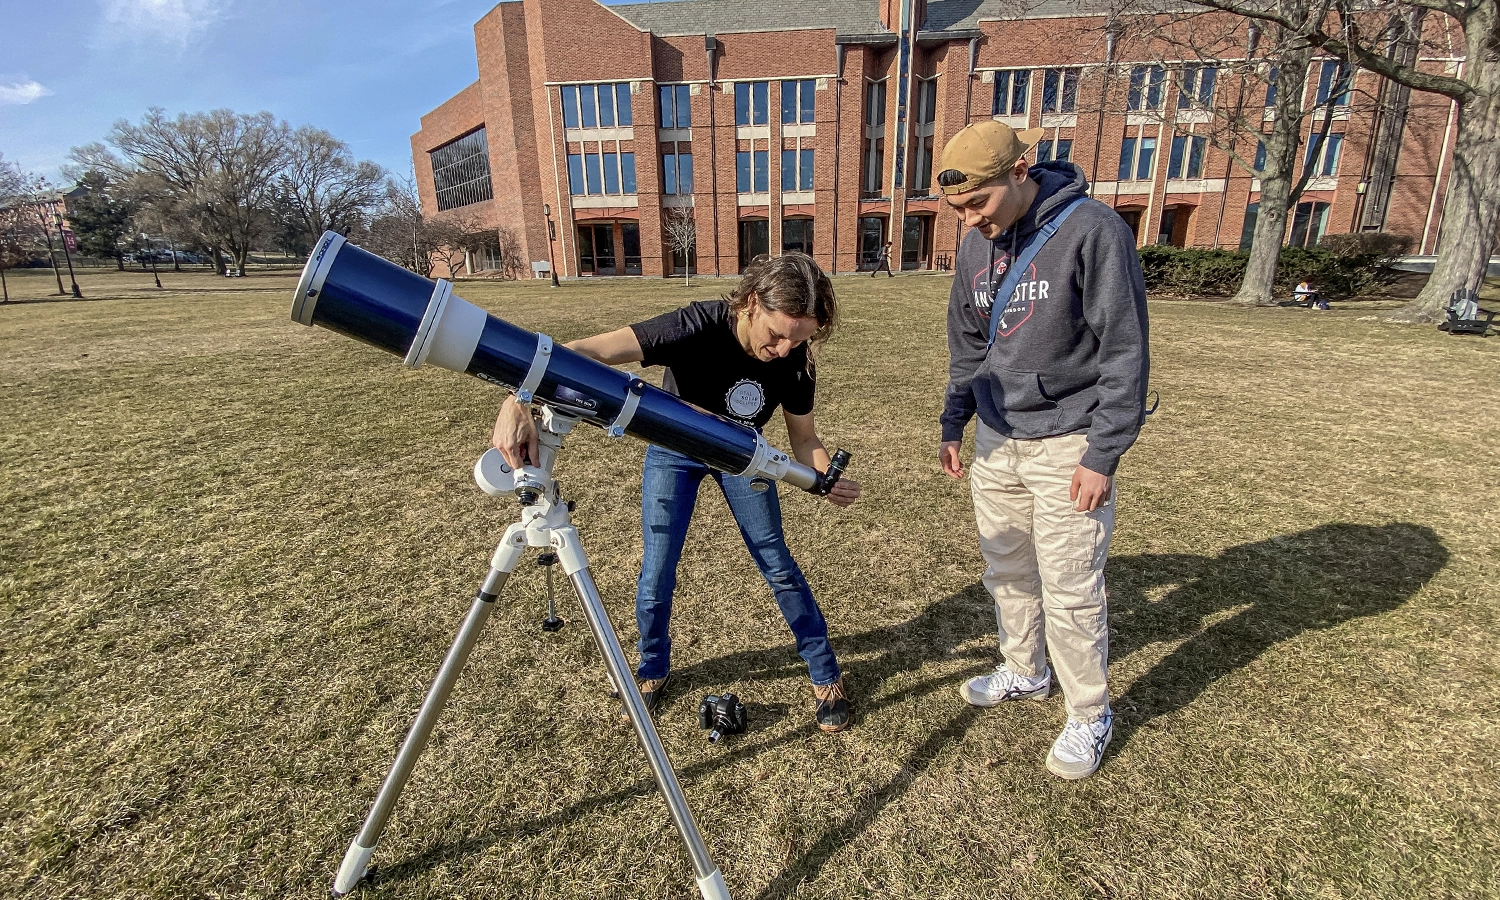 In anticipation of the Total Solar Eclipse, Associate Professor of Physics Leslie Hebb tests her telescope to examine sunspots with Andy Dinh '27.